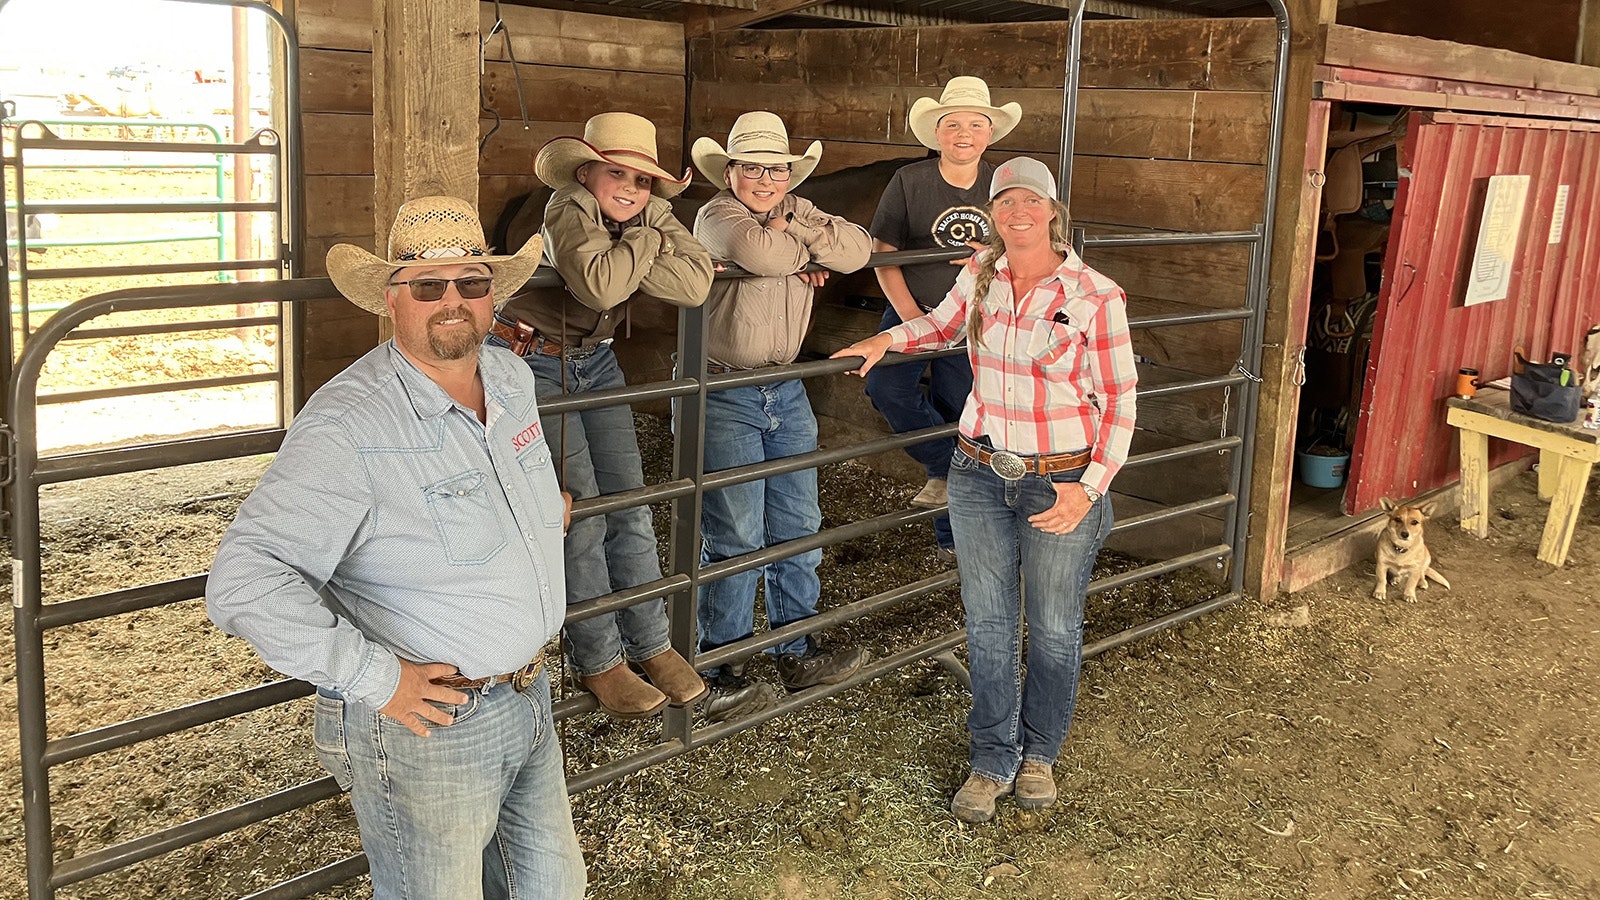 Members of the Martinez family who run the 200-acre C Bracket Horse Barn operation are from left, Scott, Wyatt, Levi, Ransom, and Christy.